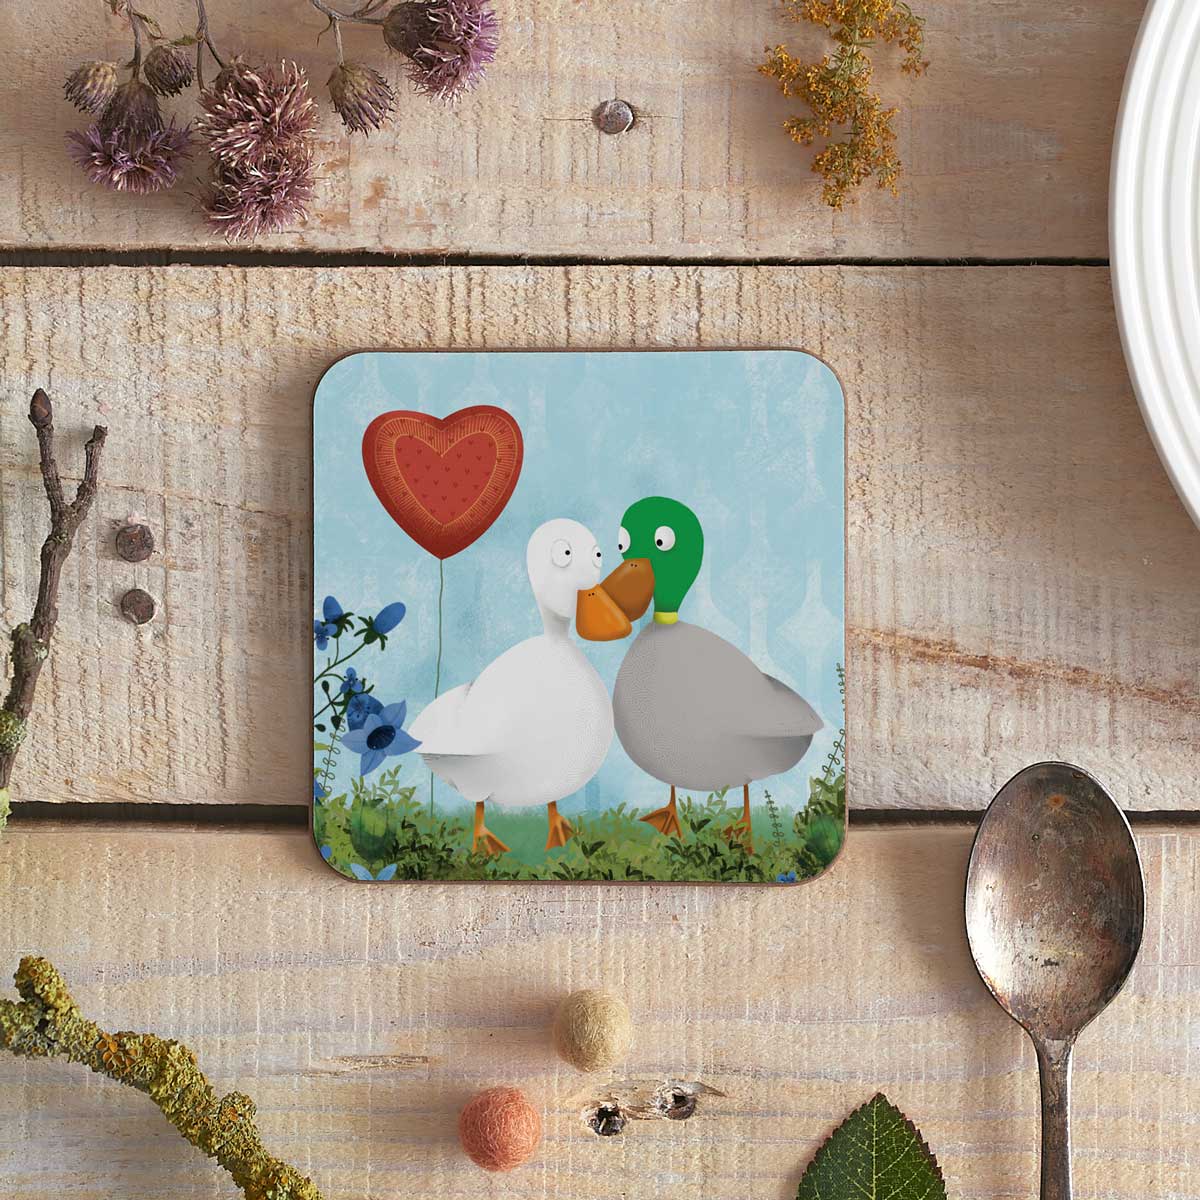 square coaster with two illustrated ducks and a heart